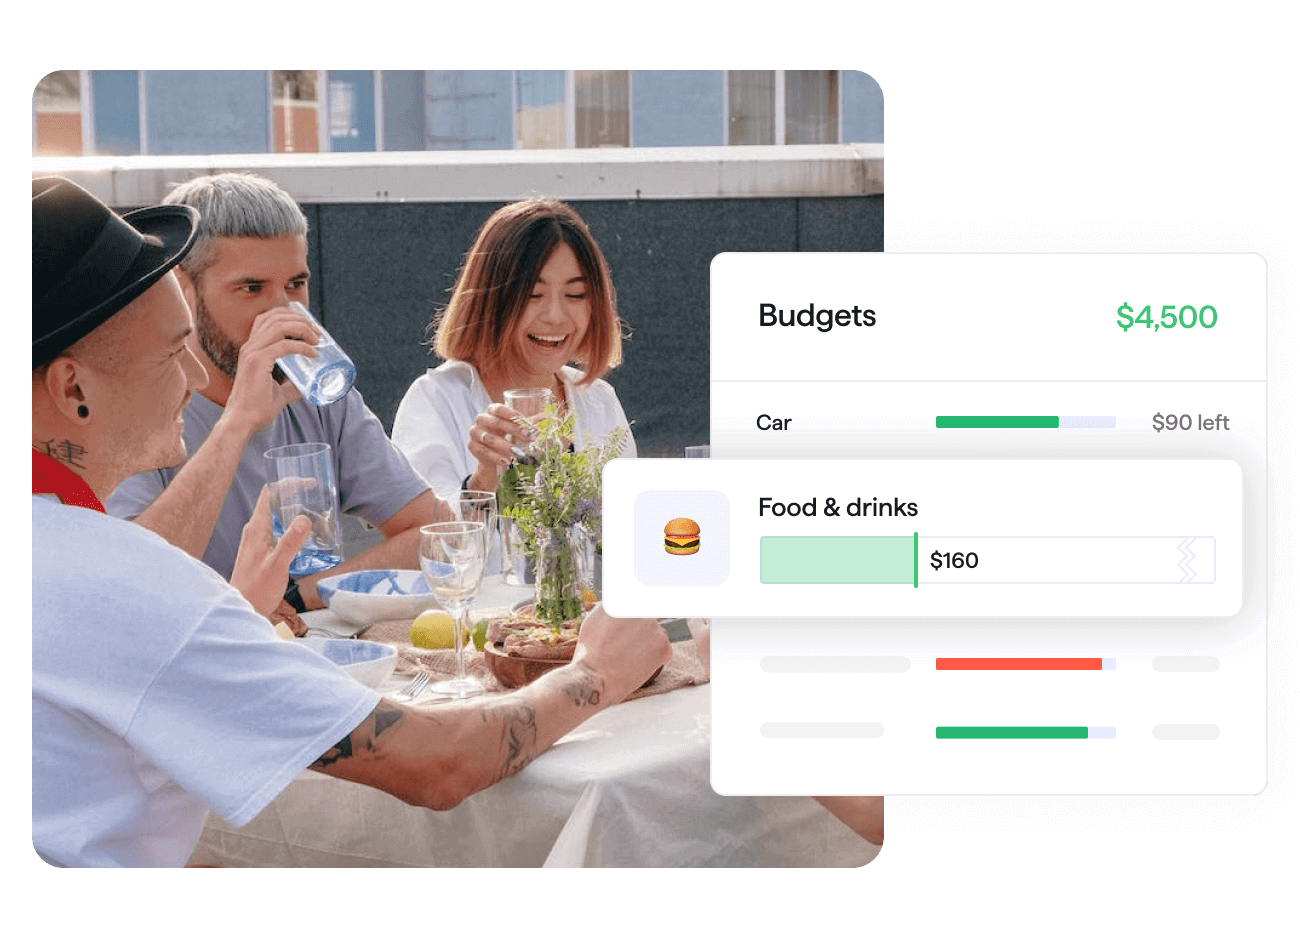 Group dining happily together with an overlay of Quicken budgets user interface for Food & Dining spending showing to the right side